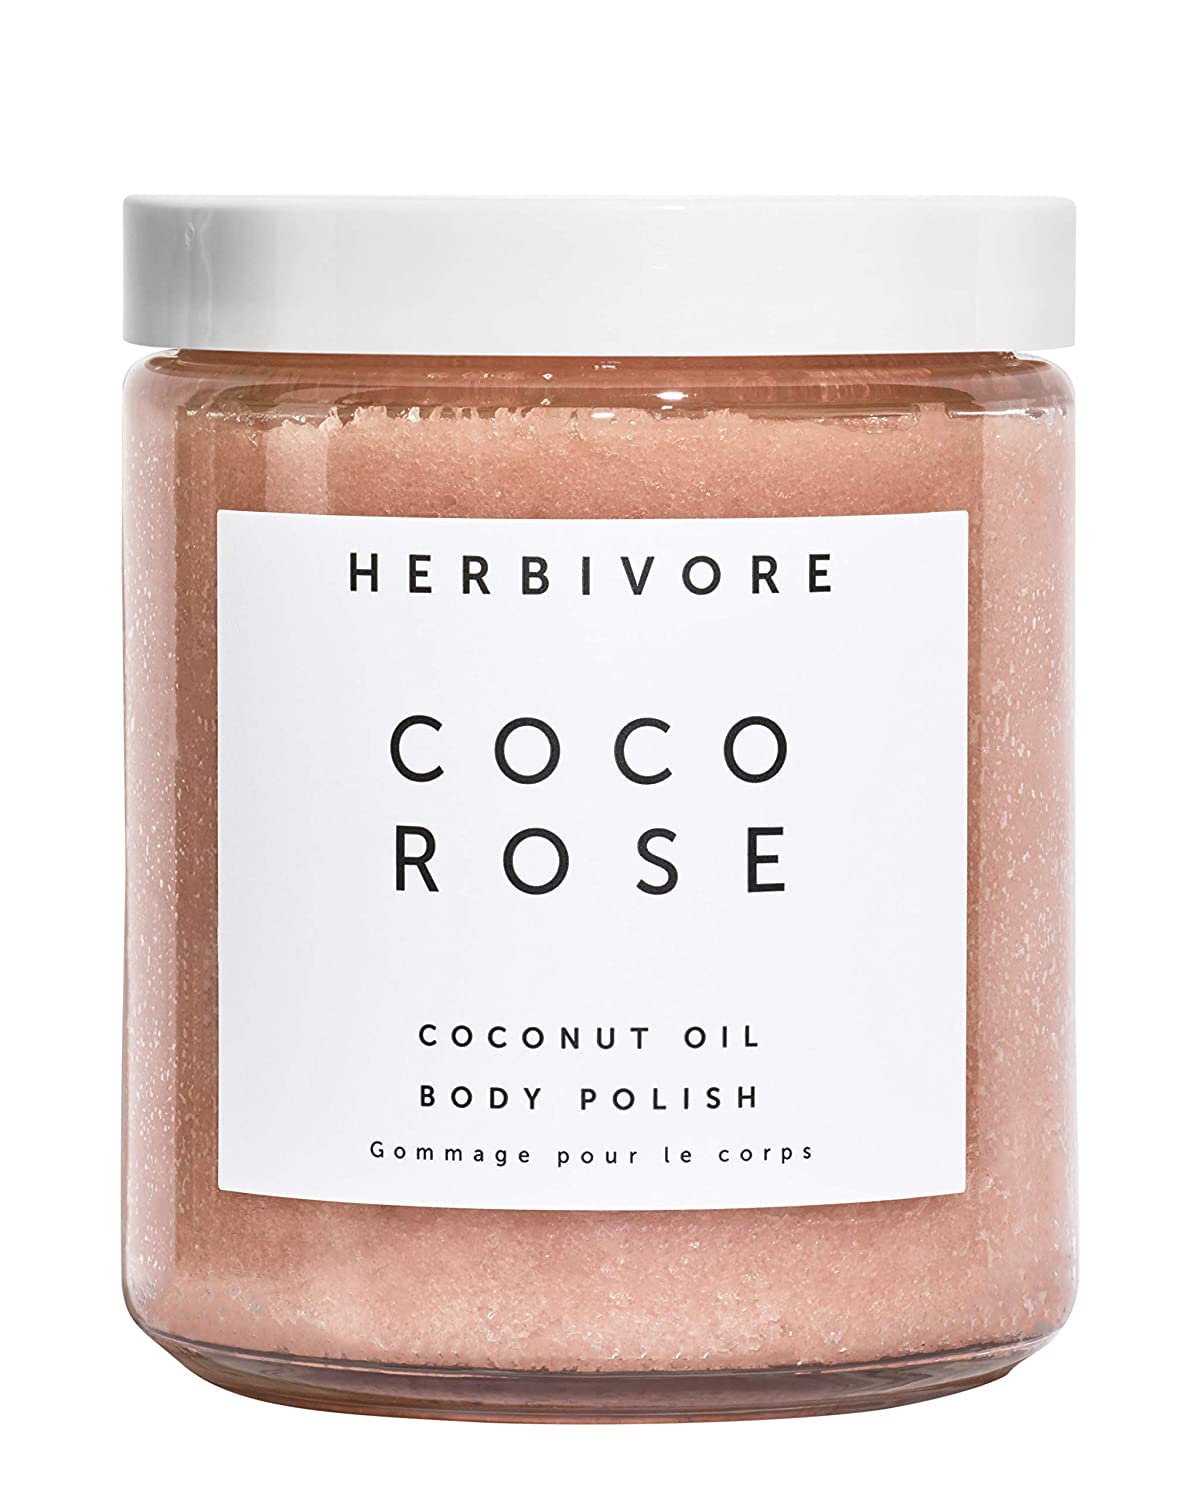 HERBIVORE Coco Rose Exfoliating Body Scrub – Cleansing Detox with Pink Clay, Moisturizing Coconut Oil & Shea Butter, Plant-based, Vegan, Cruelty-Free, 8 oz